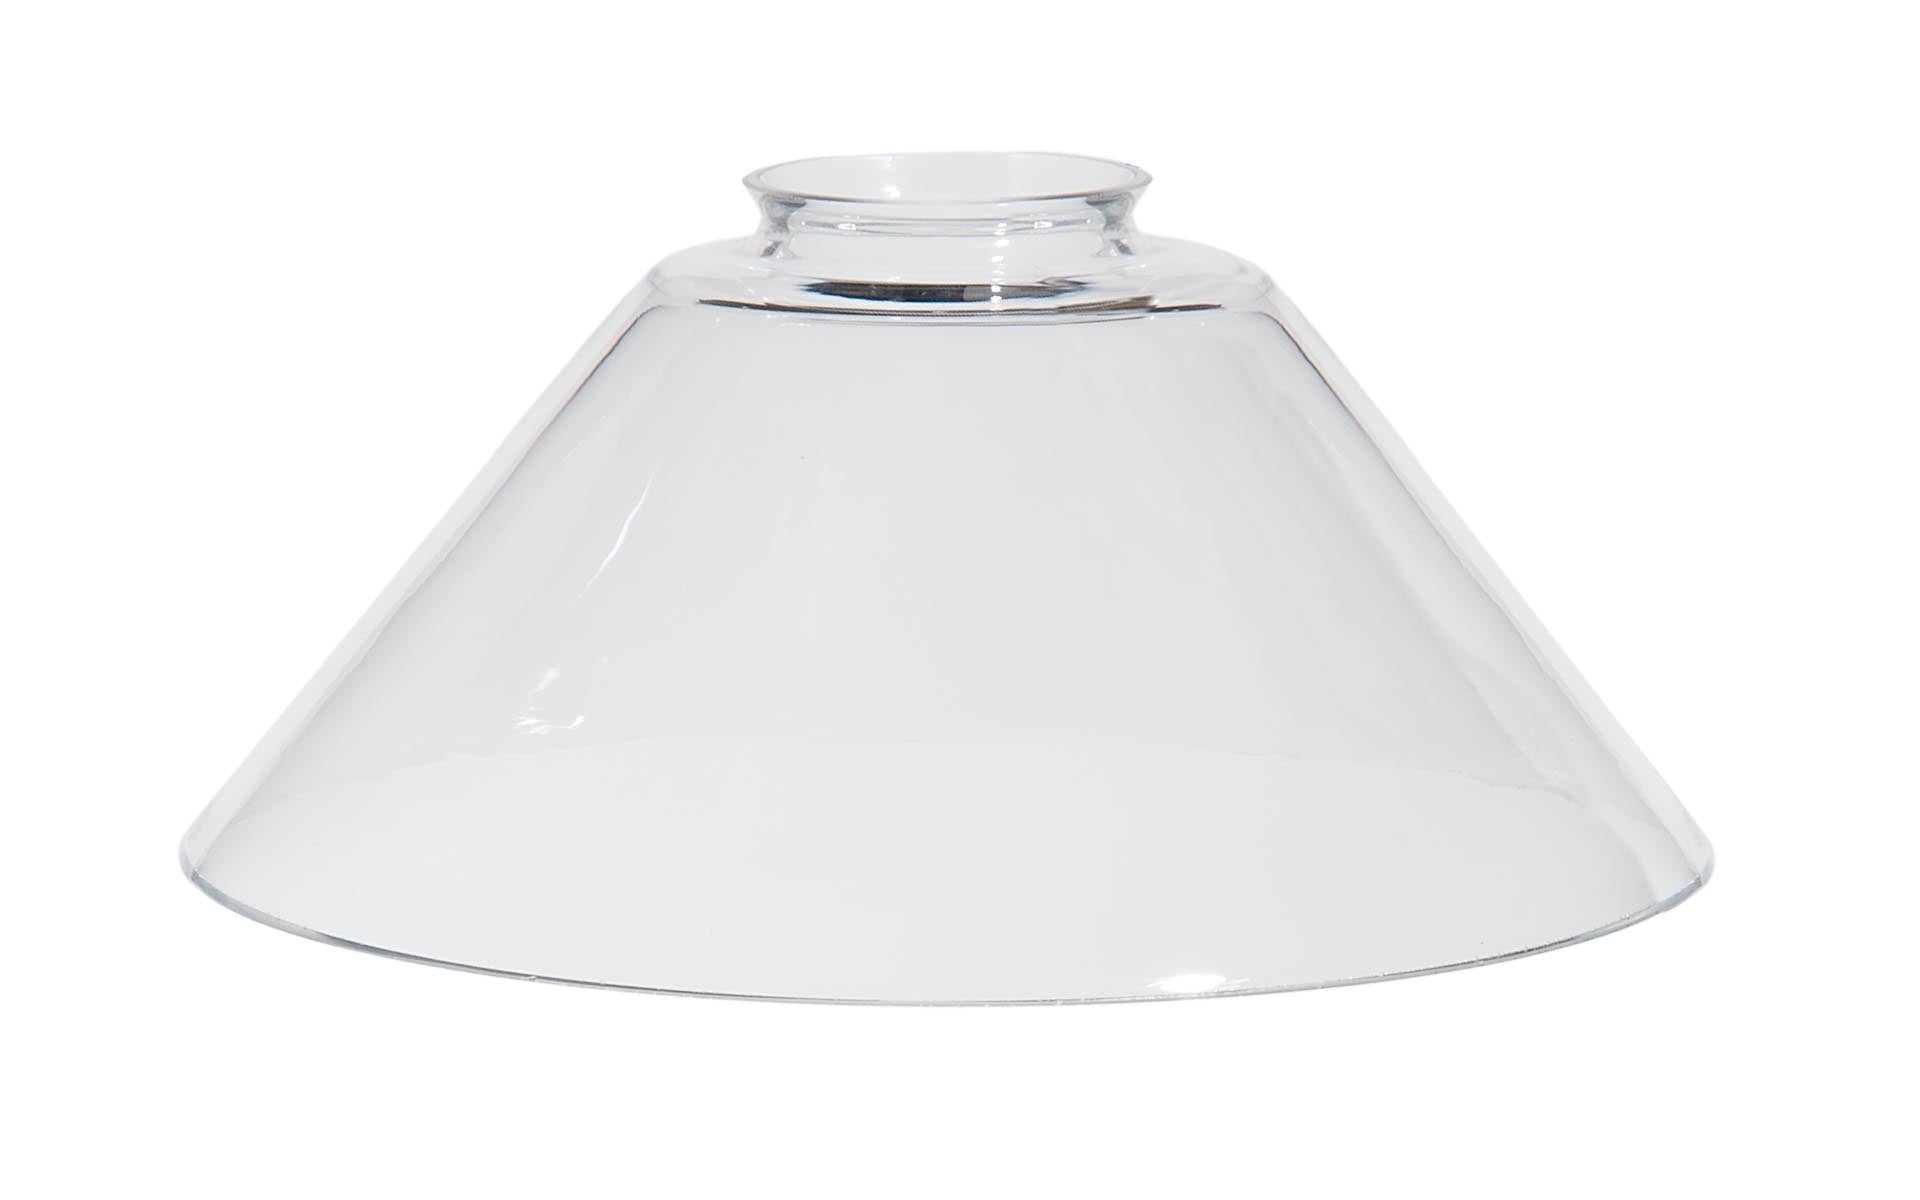 7-15/16" Dia. Clear Glass Slant Shade, 2-1/4" Fitter 